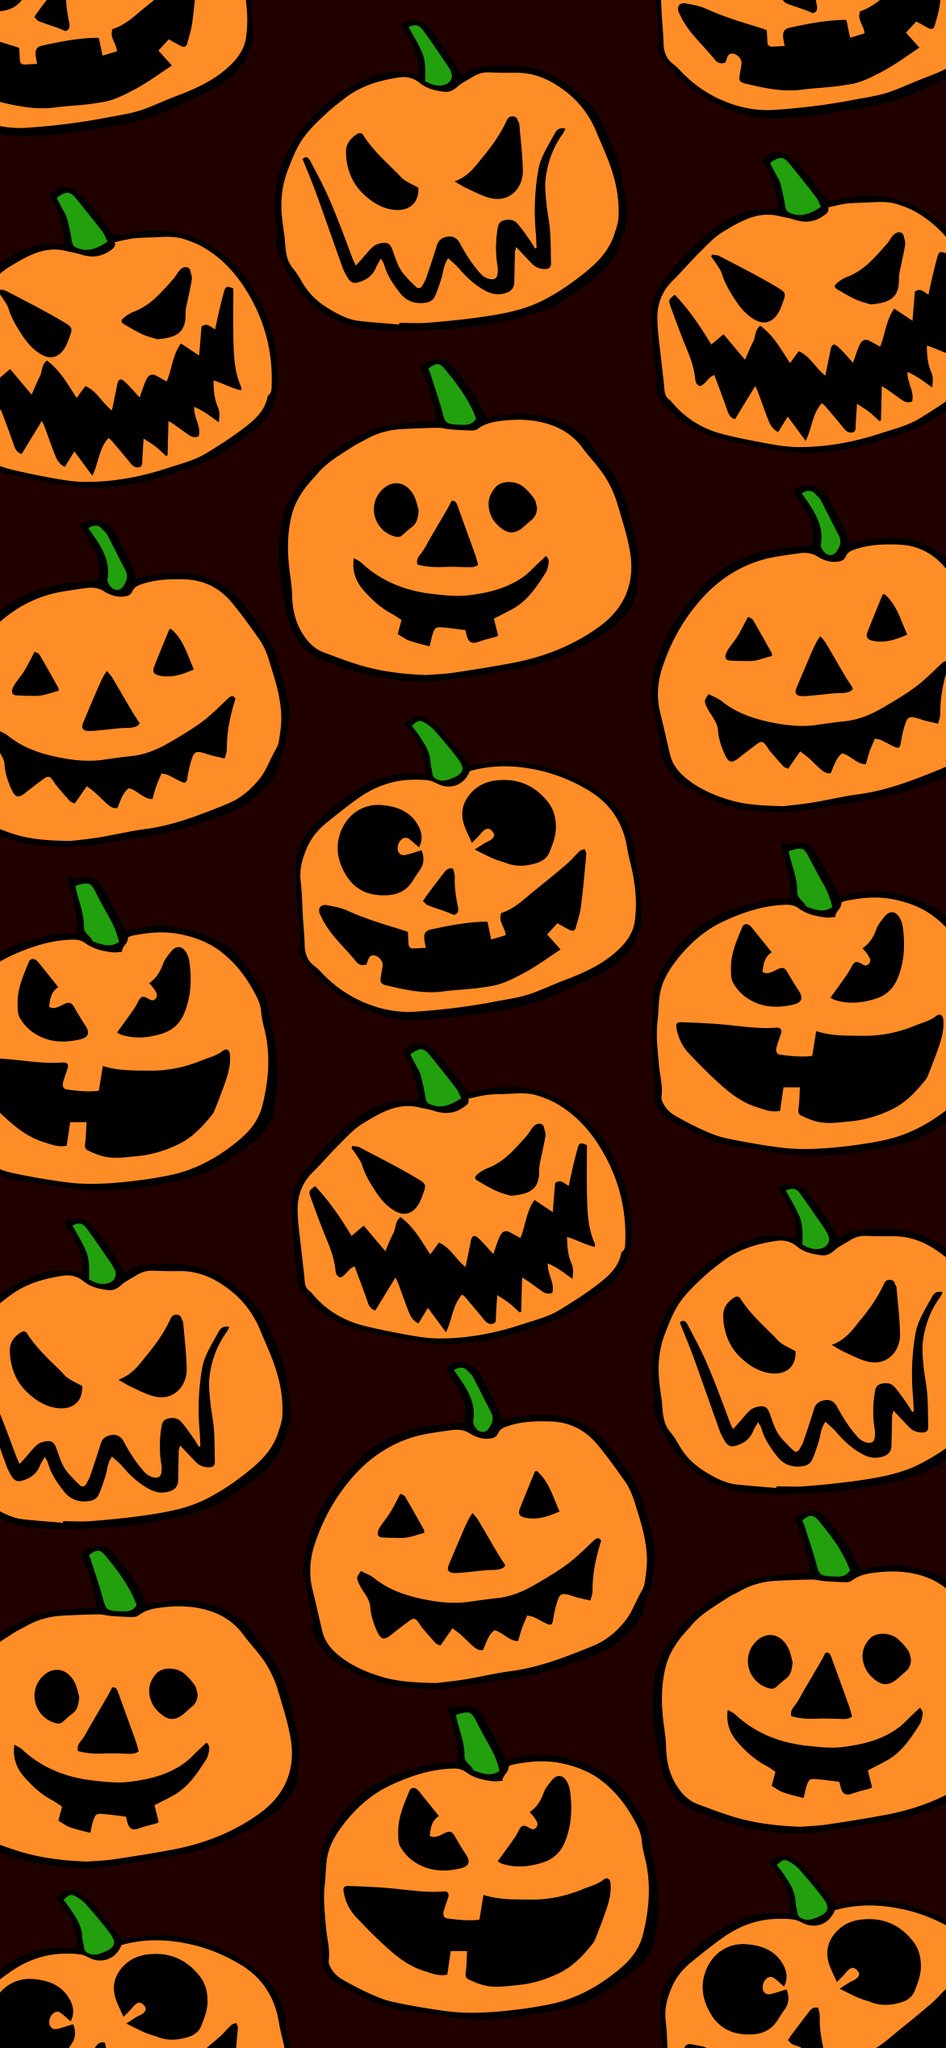 Jodie Christine Cox made some spooky Halloween phone background! Feel free to download and use them